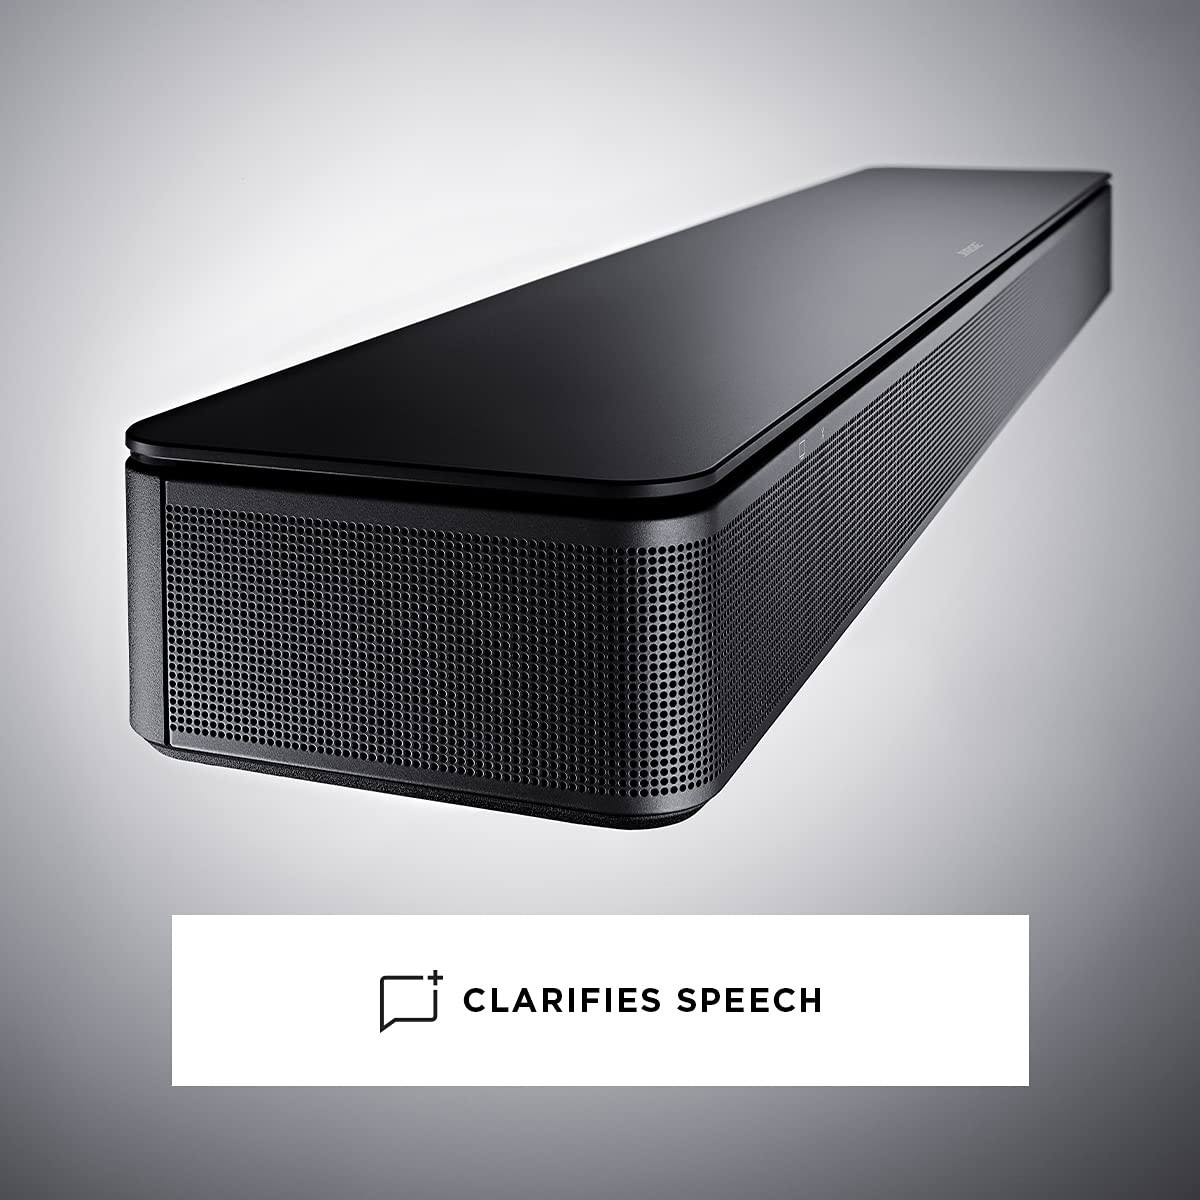 Bose TV Speaker- Small Soundbar for TV with Bluetooth and HDMI-ARC Connectivity Includes Remote Control and Optical Audio Cable Wall mountable Black